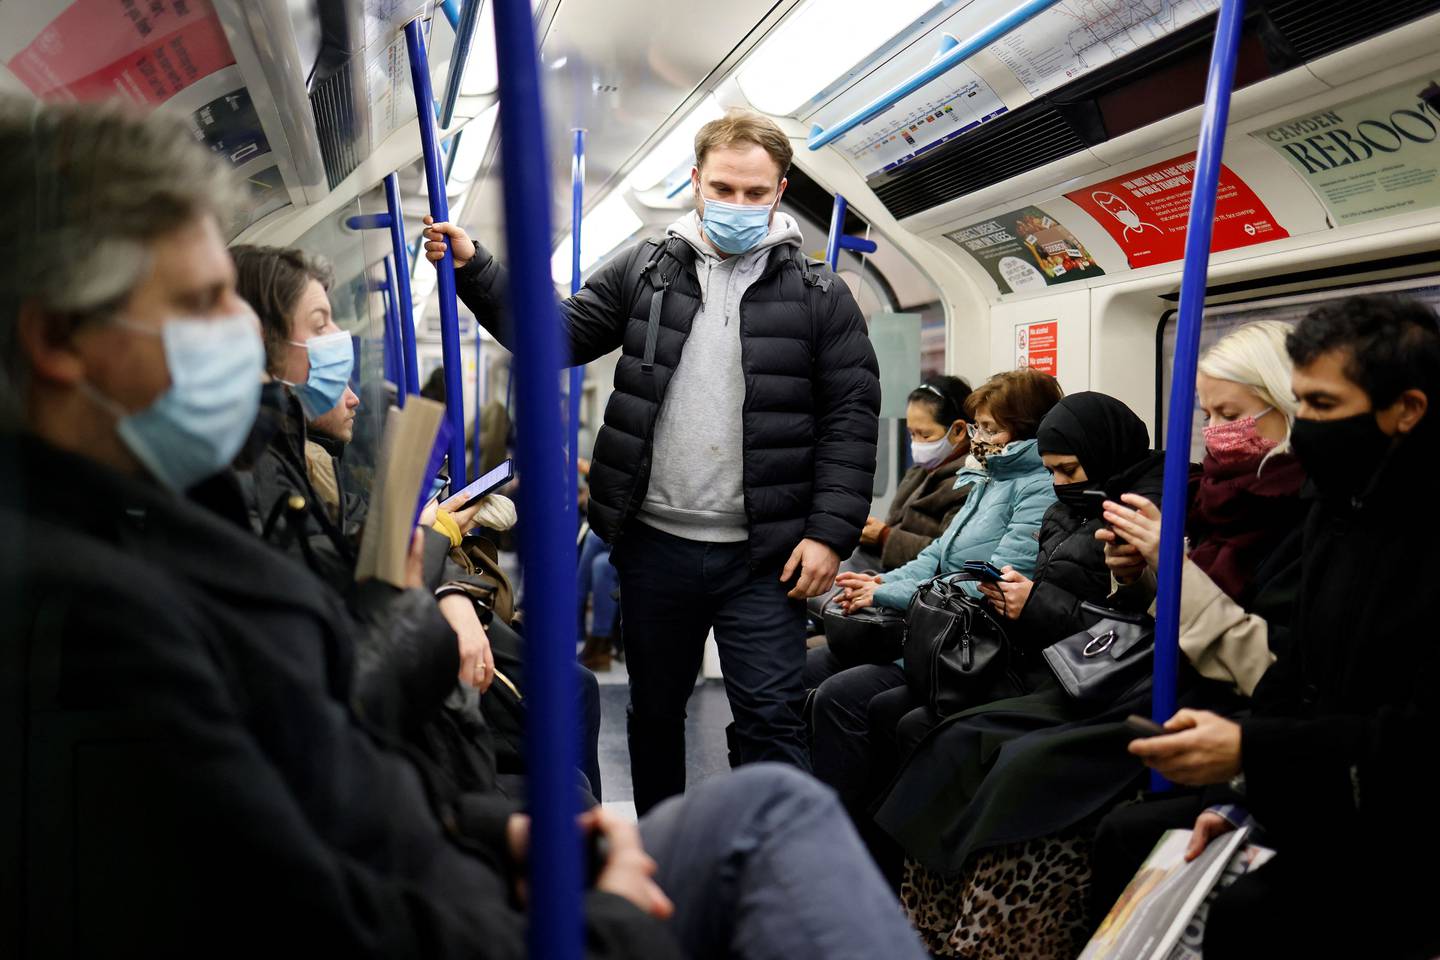 Commuters, most wearing face coverings to mitigate the spread of Covid-19, travel on a Transport for London (TfL) Victoria Line underground tube train carriage towards central London on January 5, 2022.  - British hospitals have switched to a "war footing" due to staff shortages caused by a wave of Omicron infections, the government said Tuesday, as the country's daily Covid caseload breached 200,000 for the first time.  (Photo by Tolga Akmen  /  AFP)